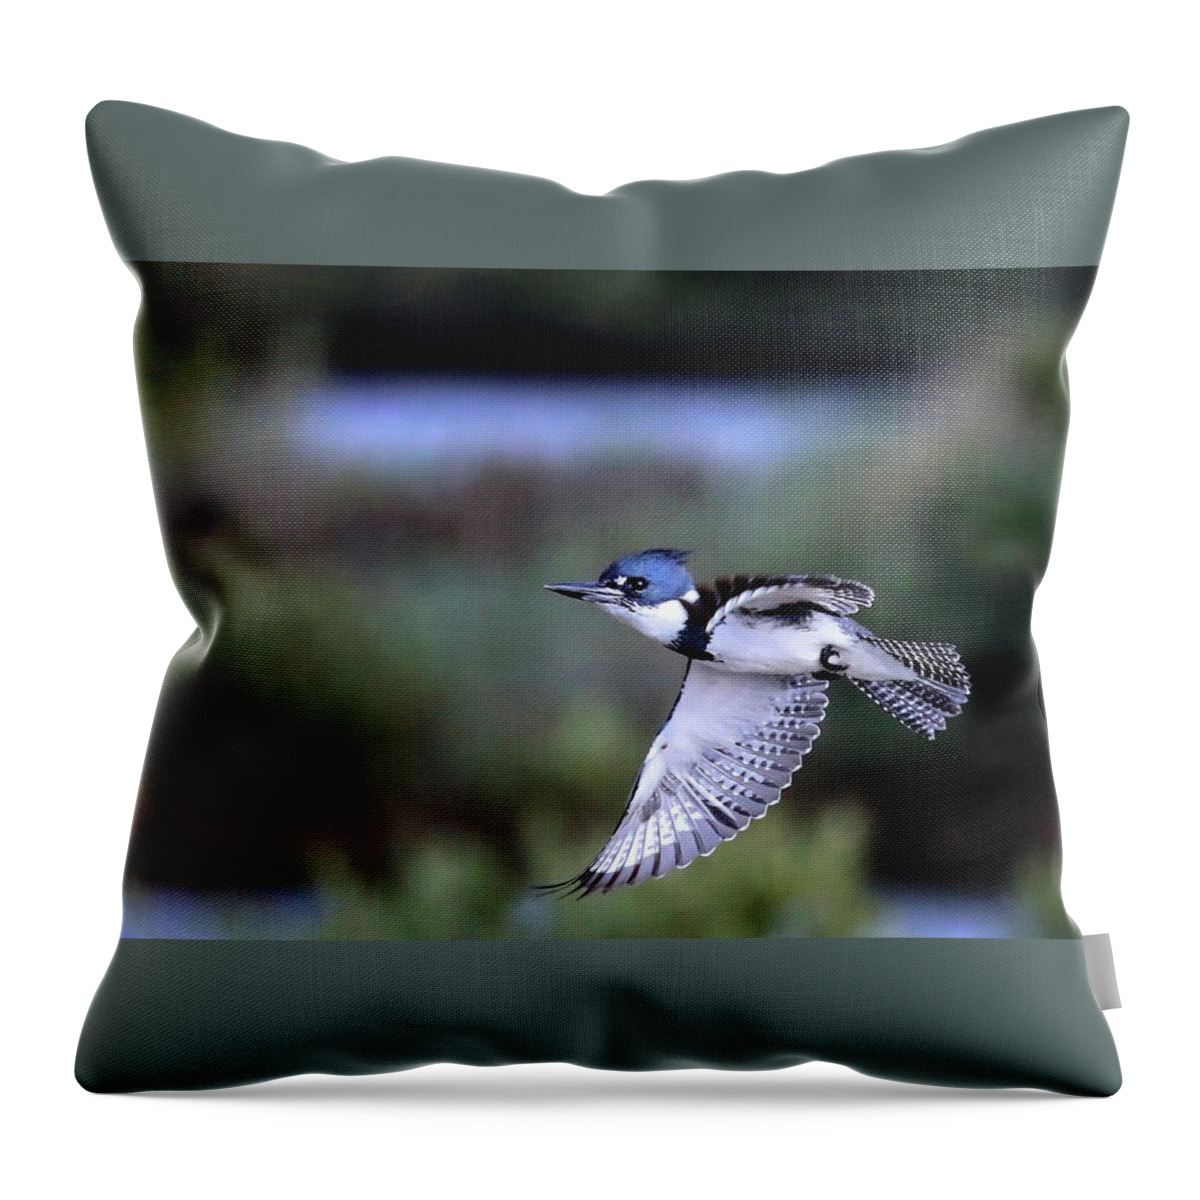 Kingfisher Throw Pillow featuring the photograph Kingfisher in Flight by Jaki Miller